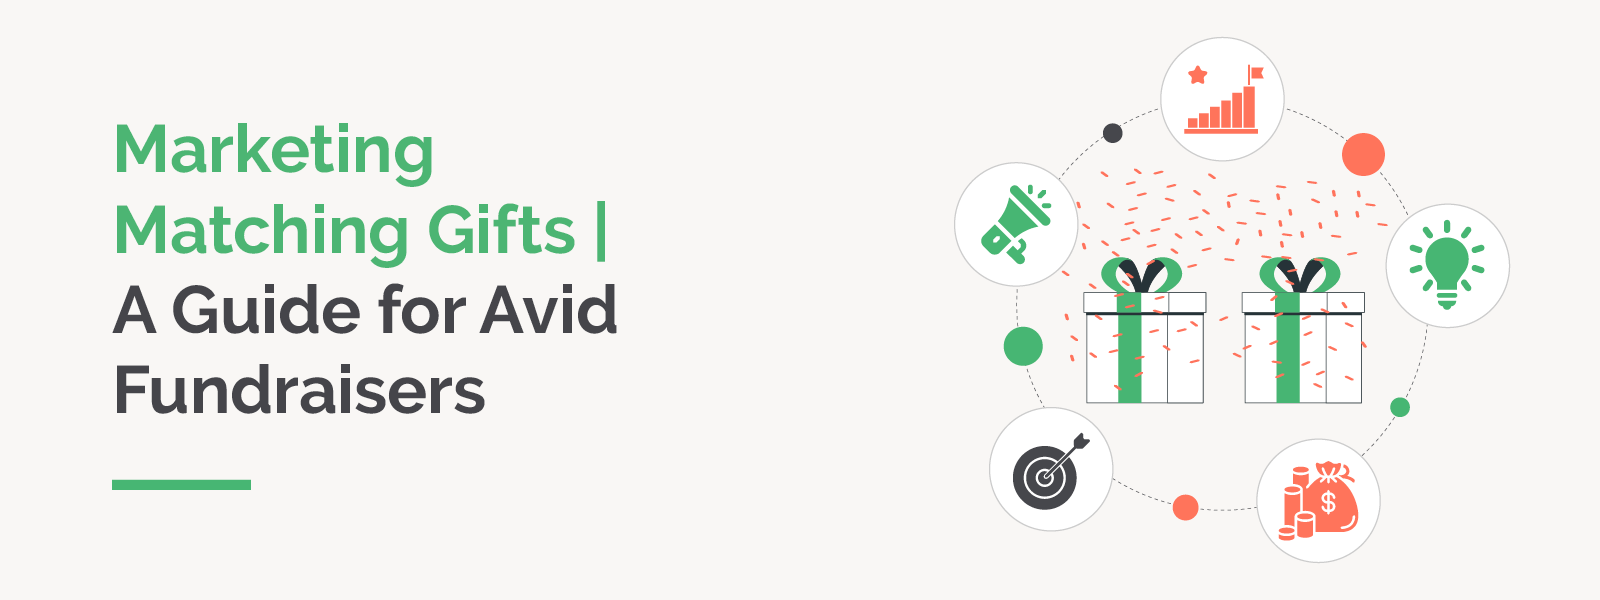 Marketing Matching Gifts: A Guide for Avid Fundraisers